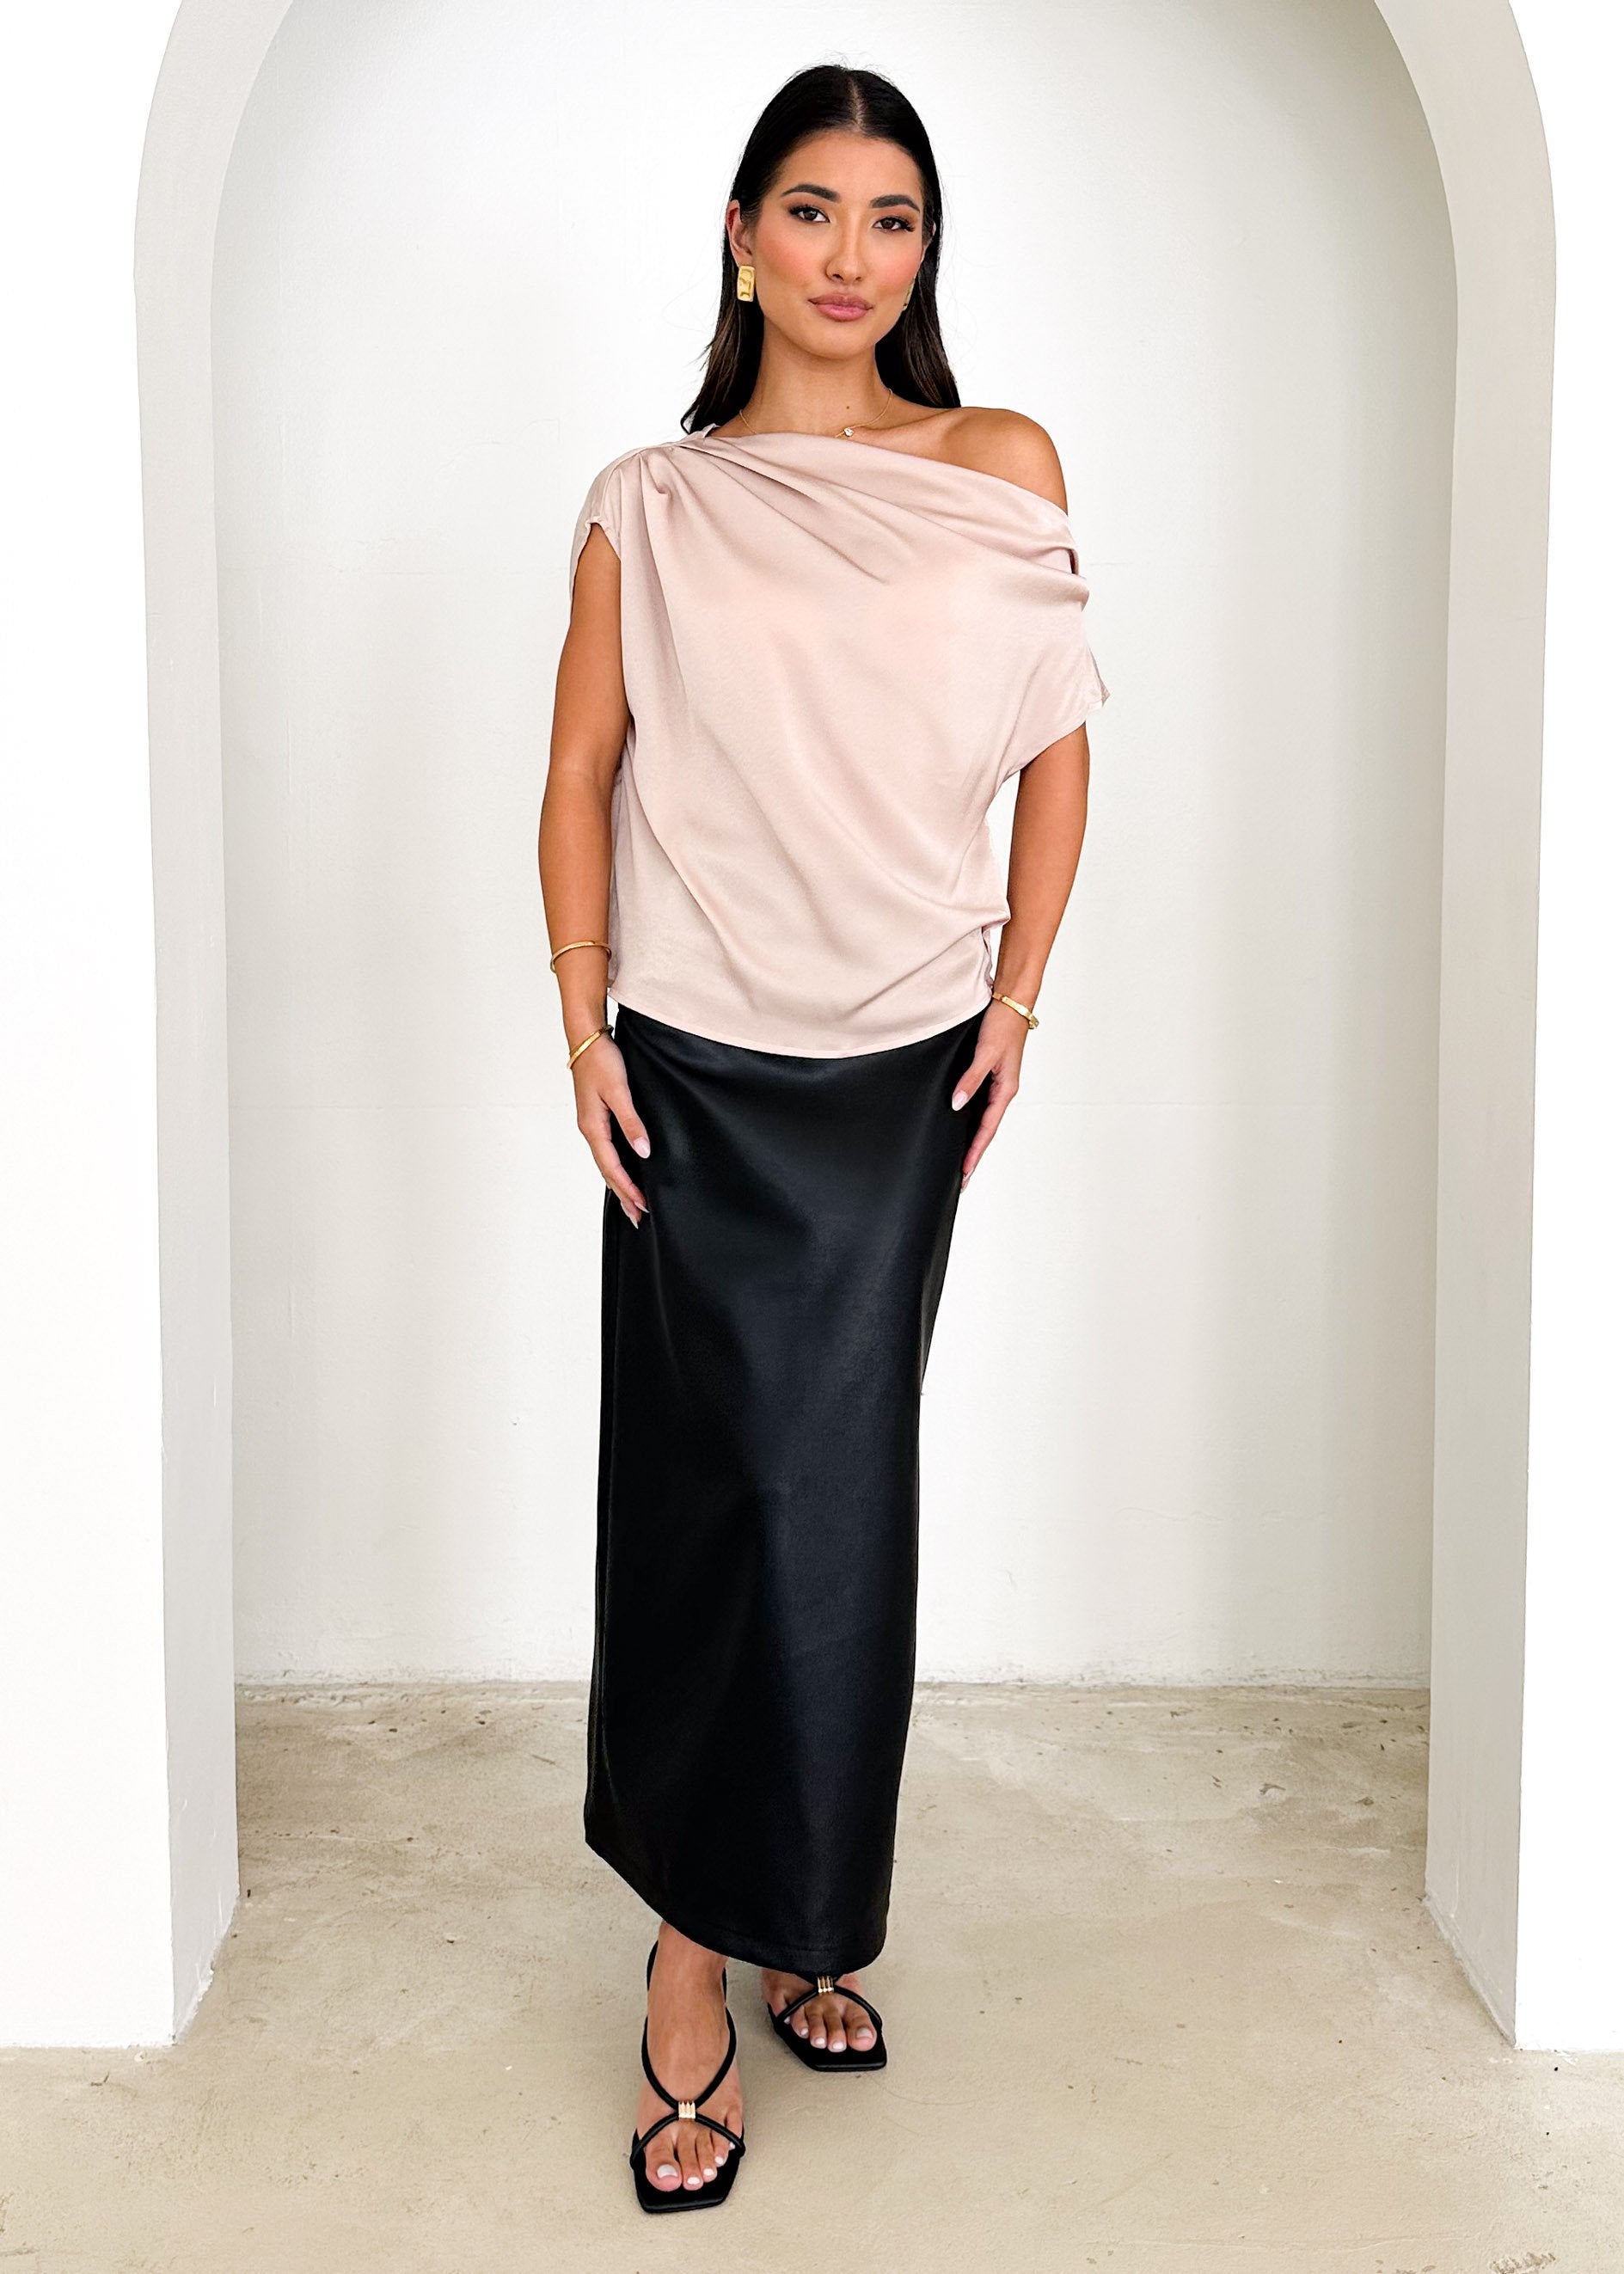 Isstra One Shoulder Top - Champagne